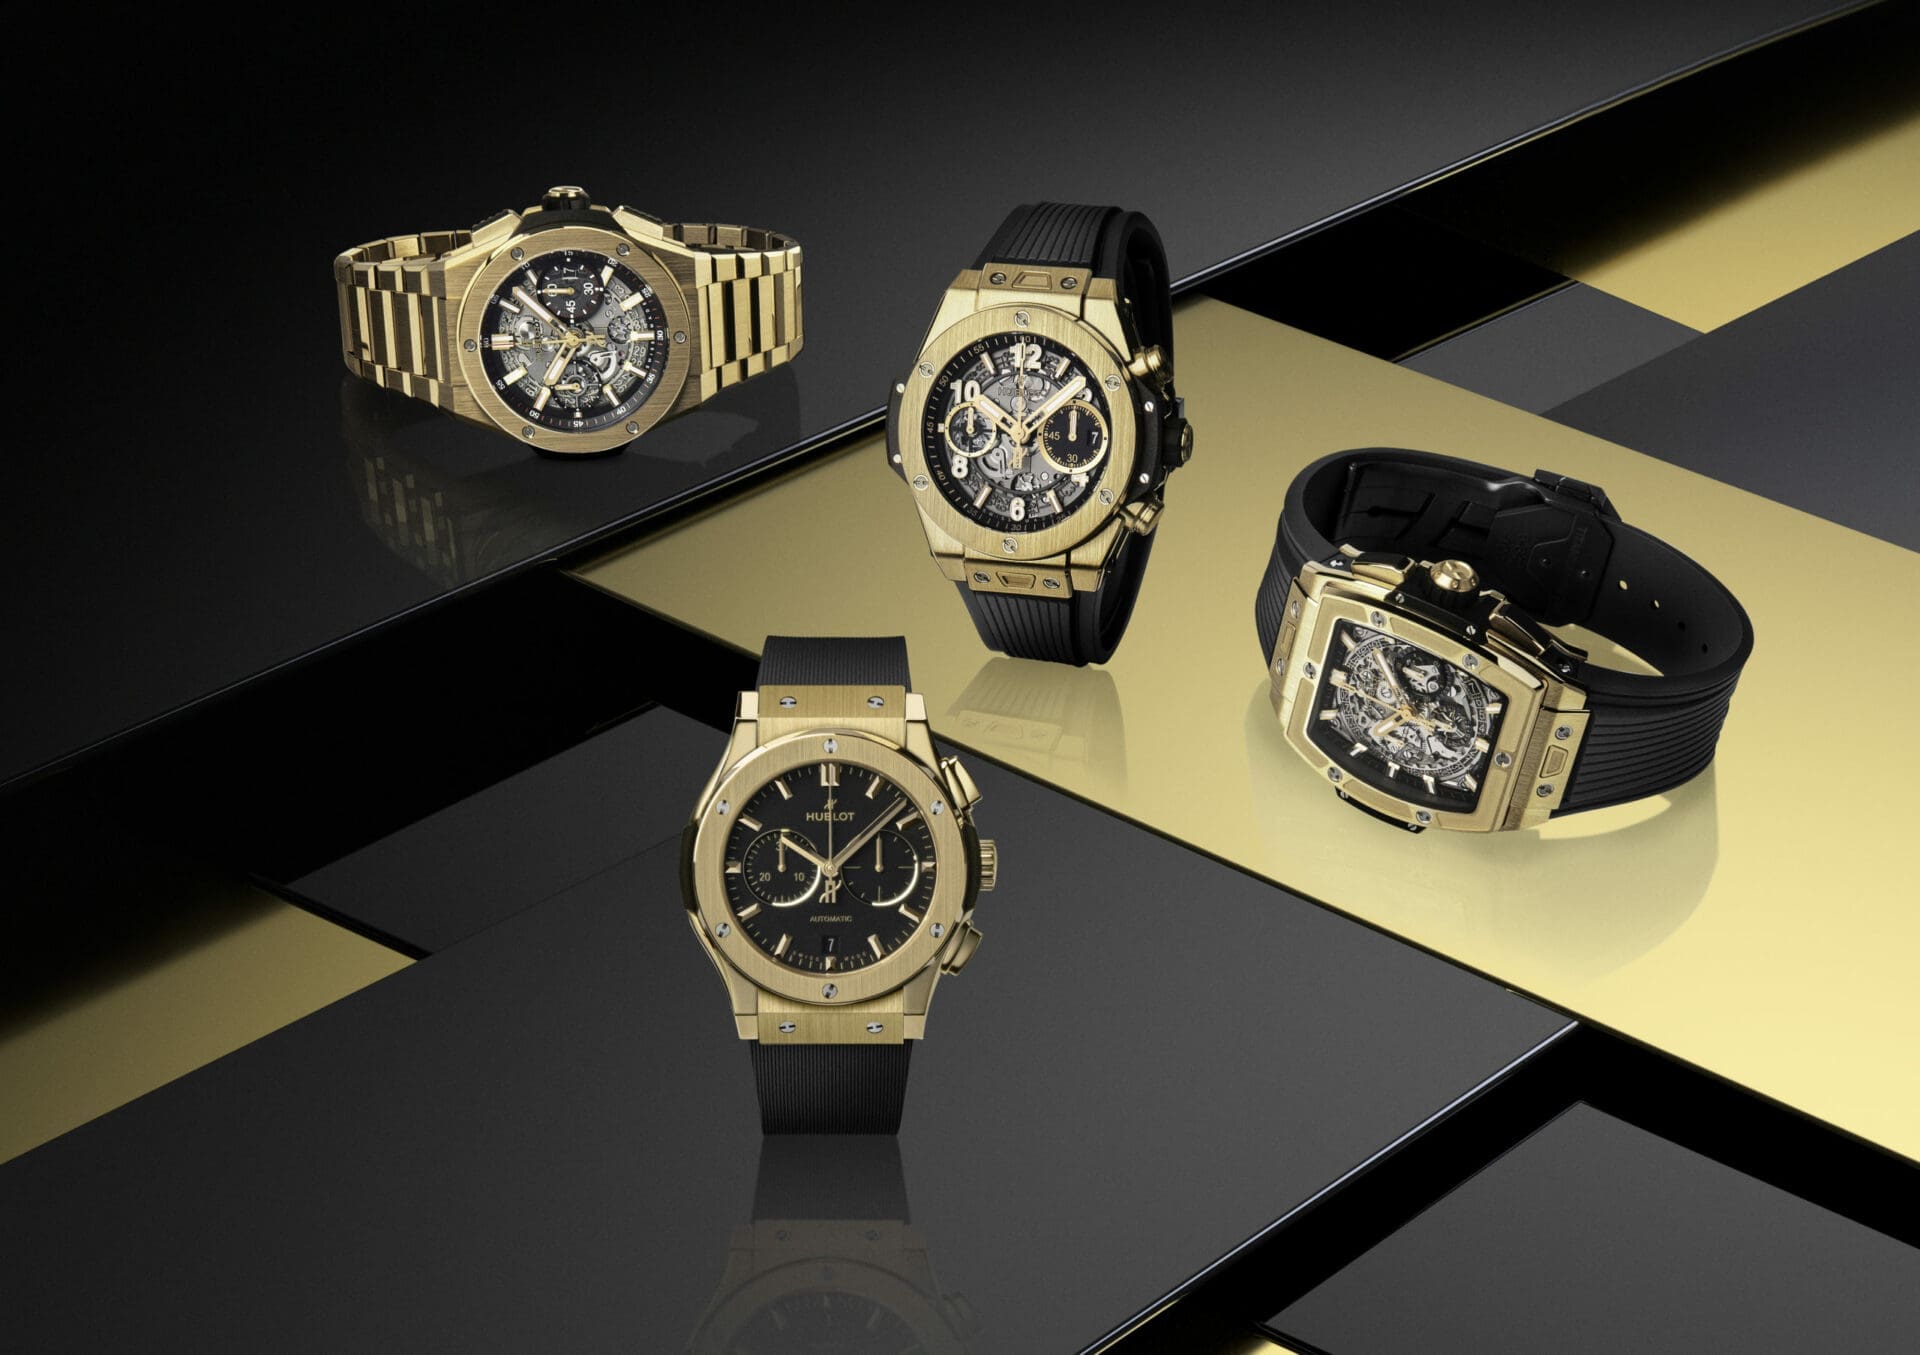 Hublot Yellow Gold collection is a return to the brand's trailblazing roots